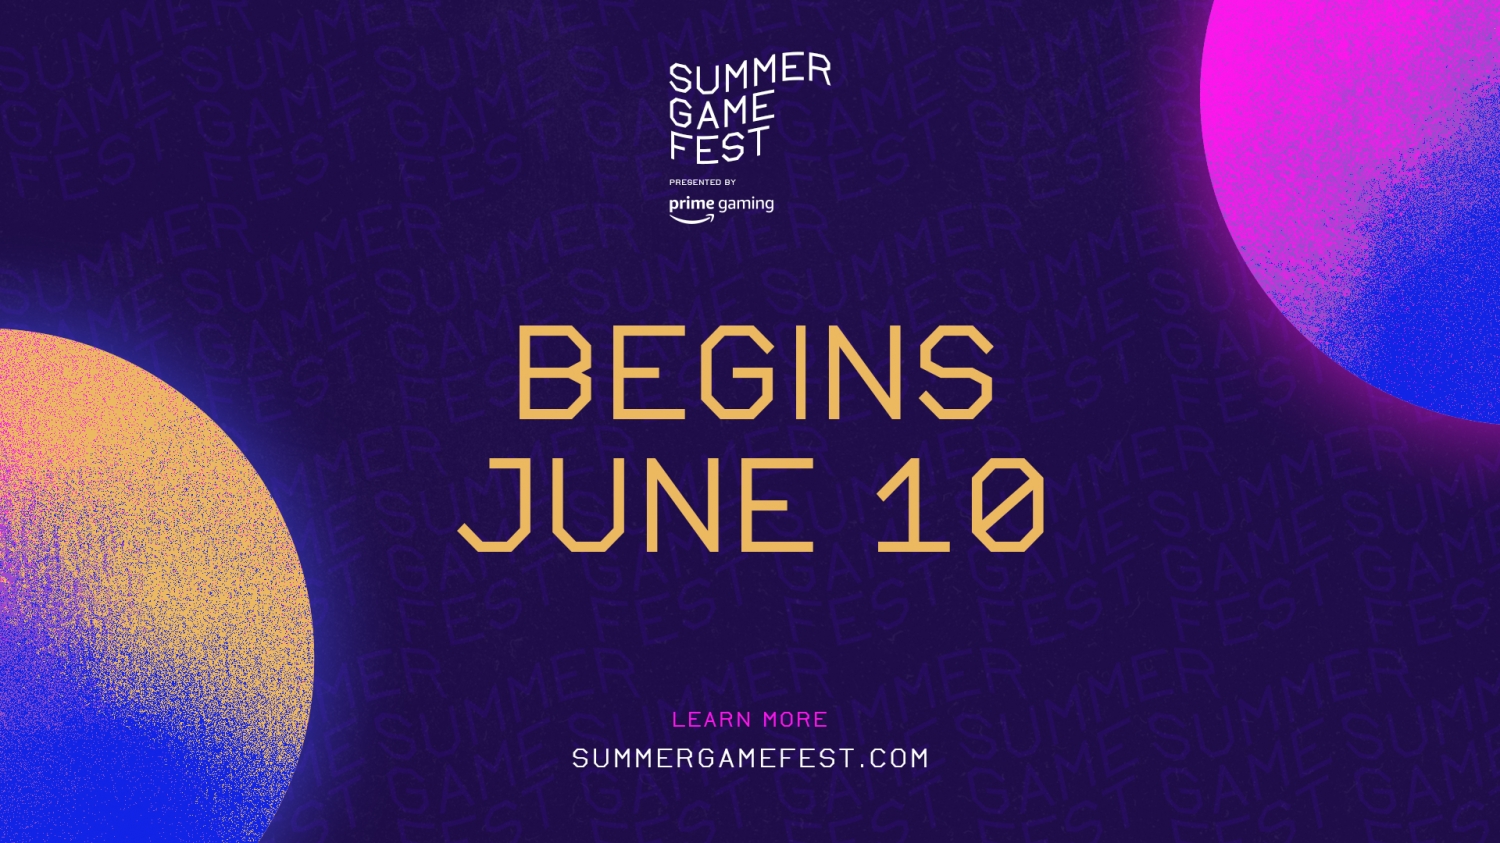 Summer Game Fest starts June 10 with 35 attendees announced